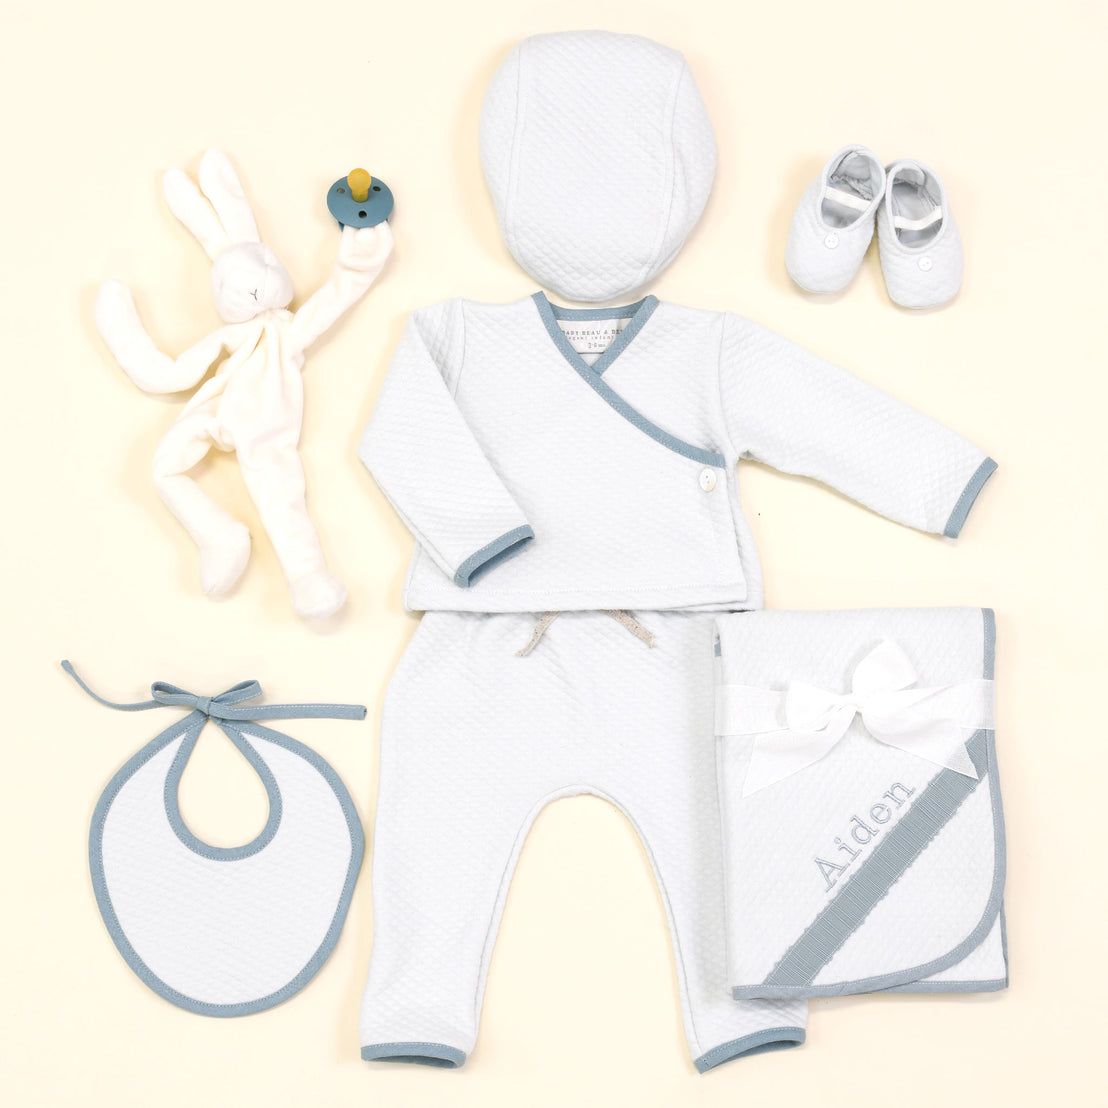 A newborn baby starter set laid out on a light background, including a cuddly bunny plush, blue and white cap, booties, bib, and the Aiden Quilted Wrap Top and Pants.